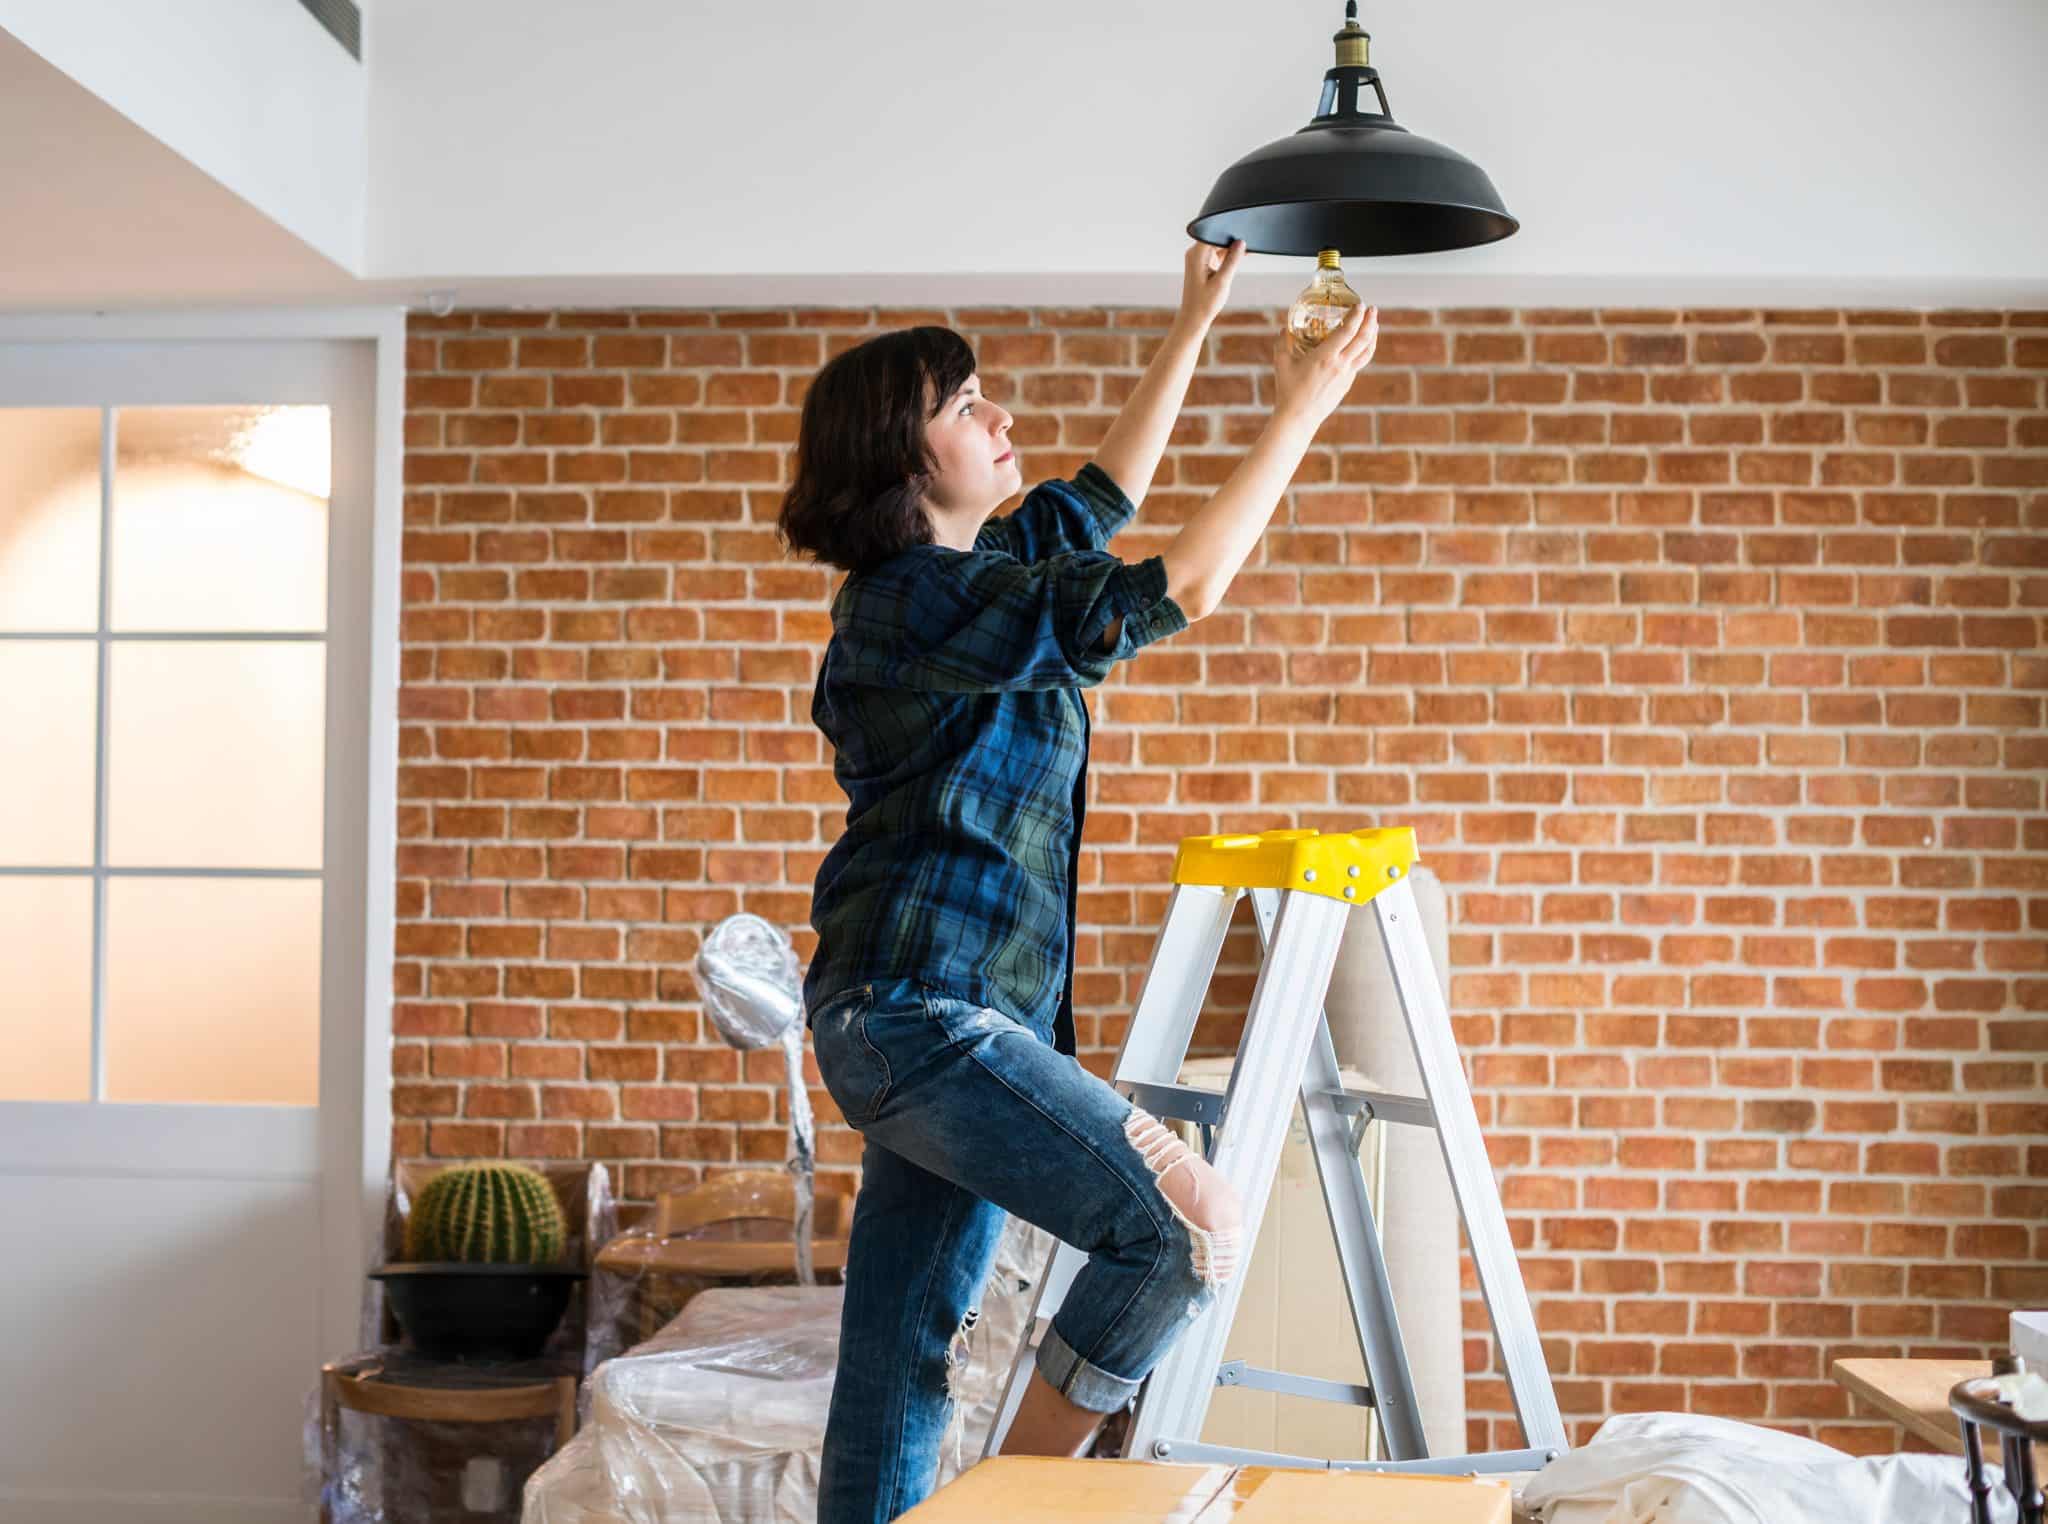 DIY vs Professional Lighting Installation: Which is Right for You?